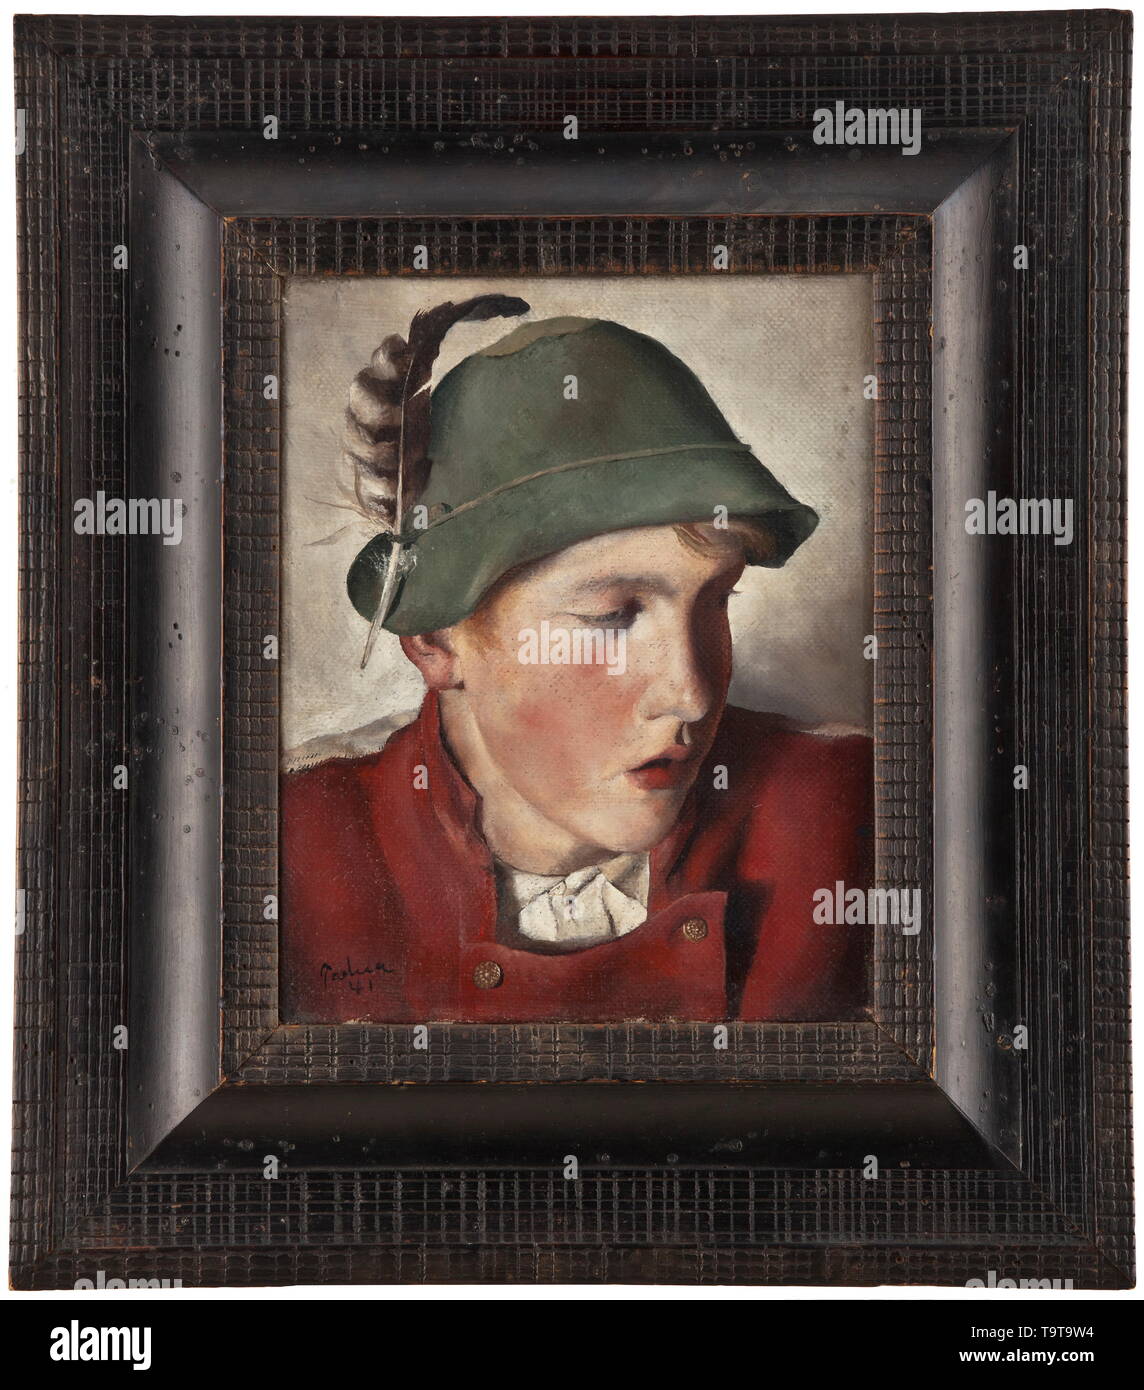 Paul Padua (1903 - 1981) - 'Bauernbub' (tr. 'Country Lad') Oil on canvas, signed at the bottom left and dated 'Padua 41'. Three-quarter profile of a boy in a red jacket and a green felt hat trimmed with a feather. In the original wooden moulded frame (slightly damaged), on the reverse the original metal seal of the Great German Art Exhibition 1942. Signs of age. Size of the painting 30 x 23.5 cm, size of the frame 49 x 43 cm. Comes with a photographic print of the painting in the Great German Art Exhibition 1942. The Bavarian painter Paul Padua was held in high esteem by hi, Editorial-Use-Only Stock Photo